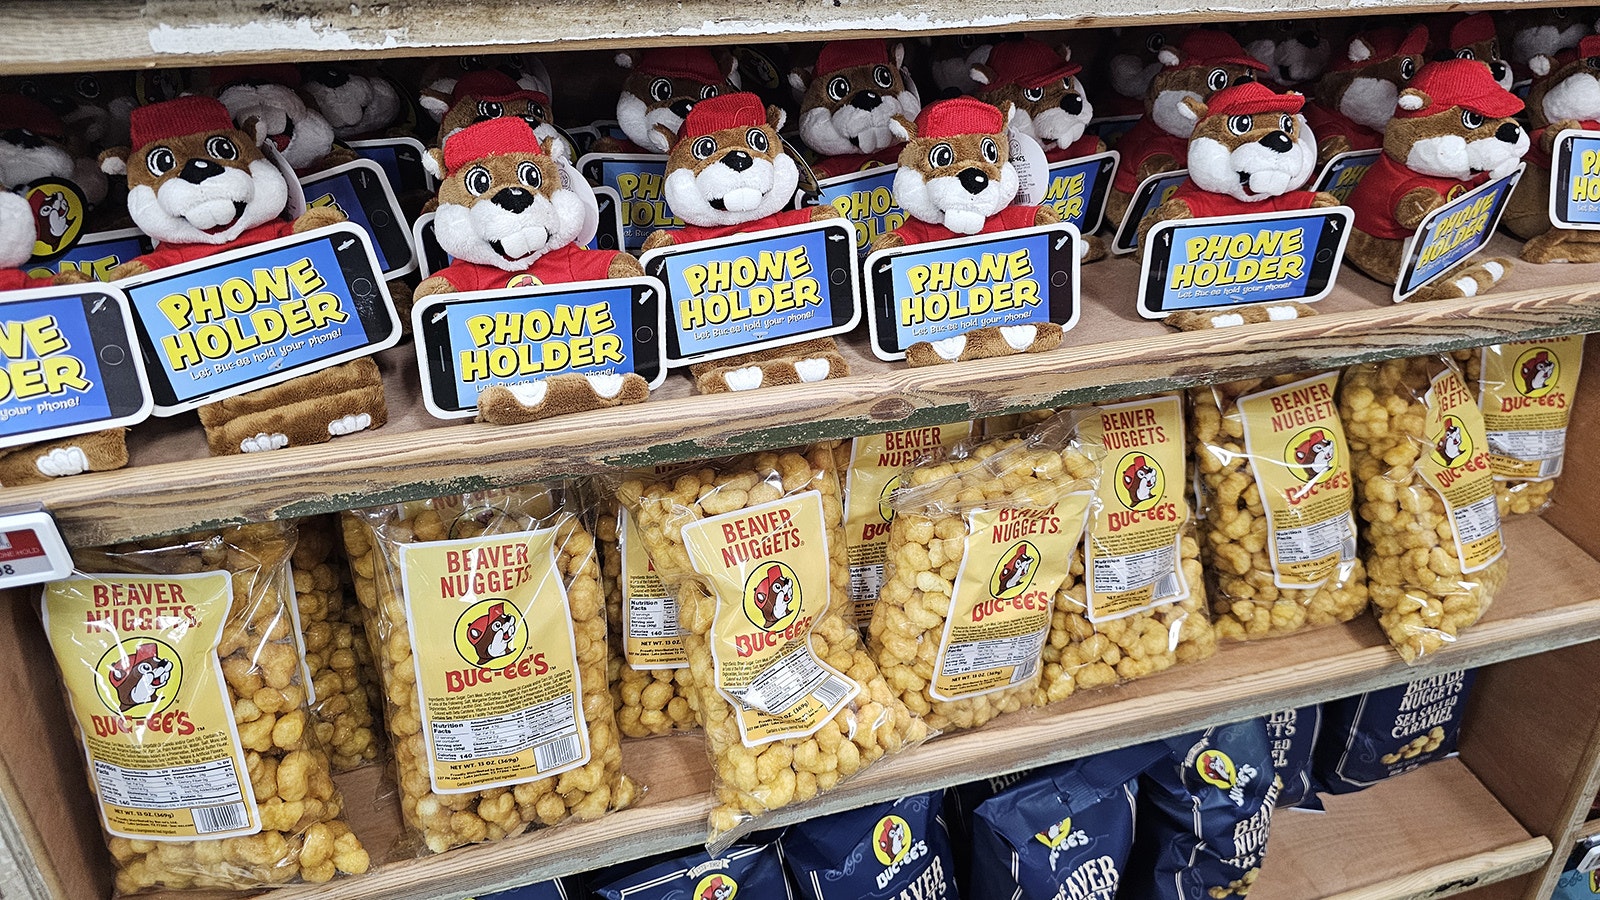 Doesn't everyone need a Buc-ee's phone holder? Certainly everyone needs a bag of Beaver Nuggets.